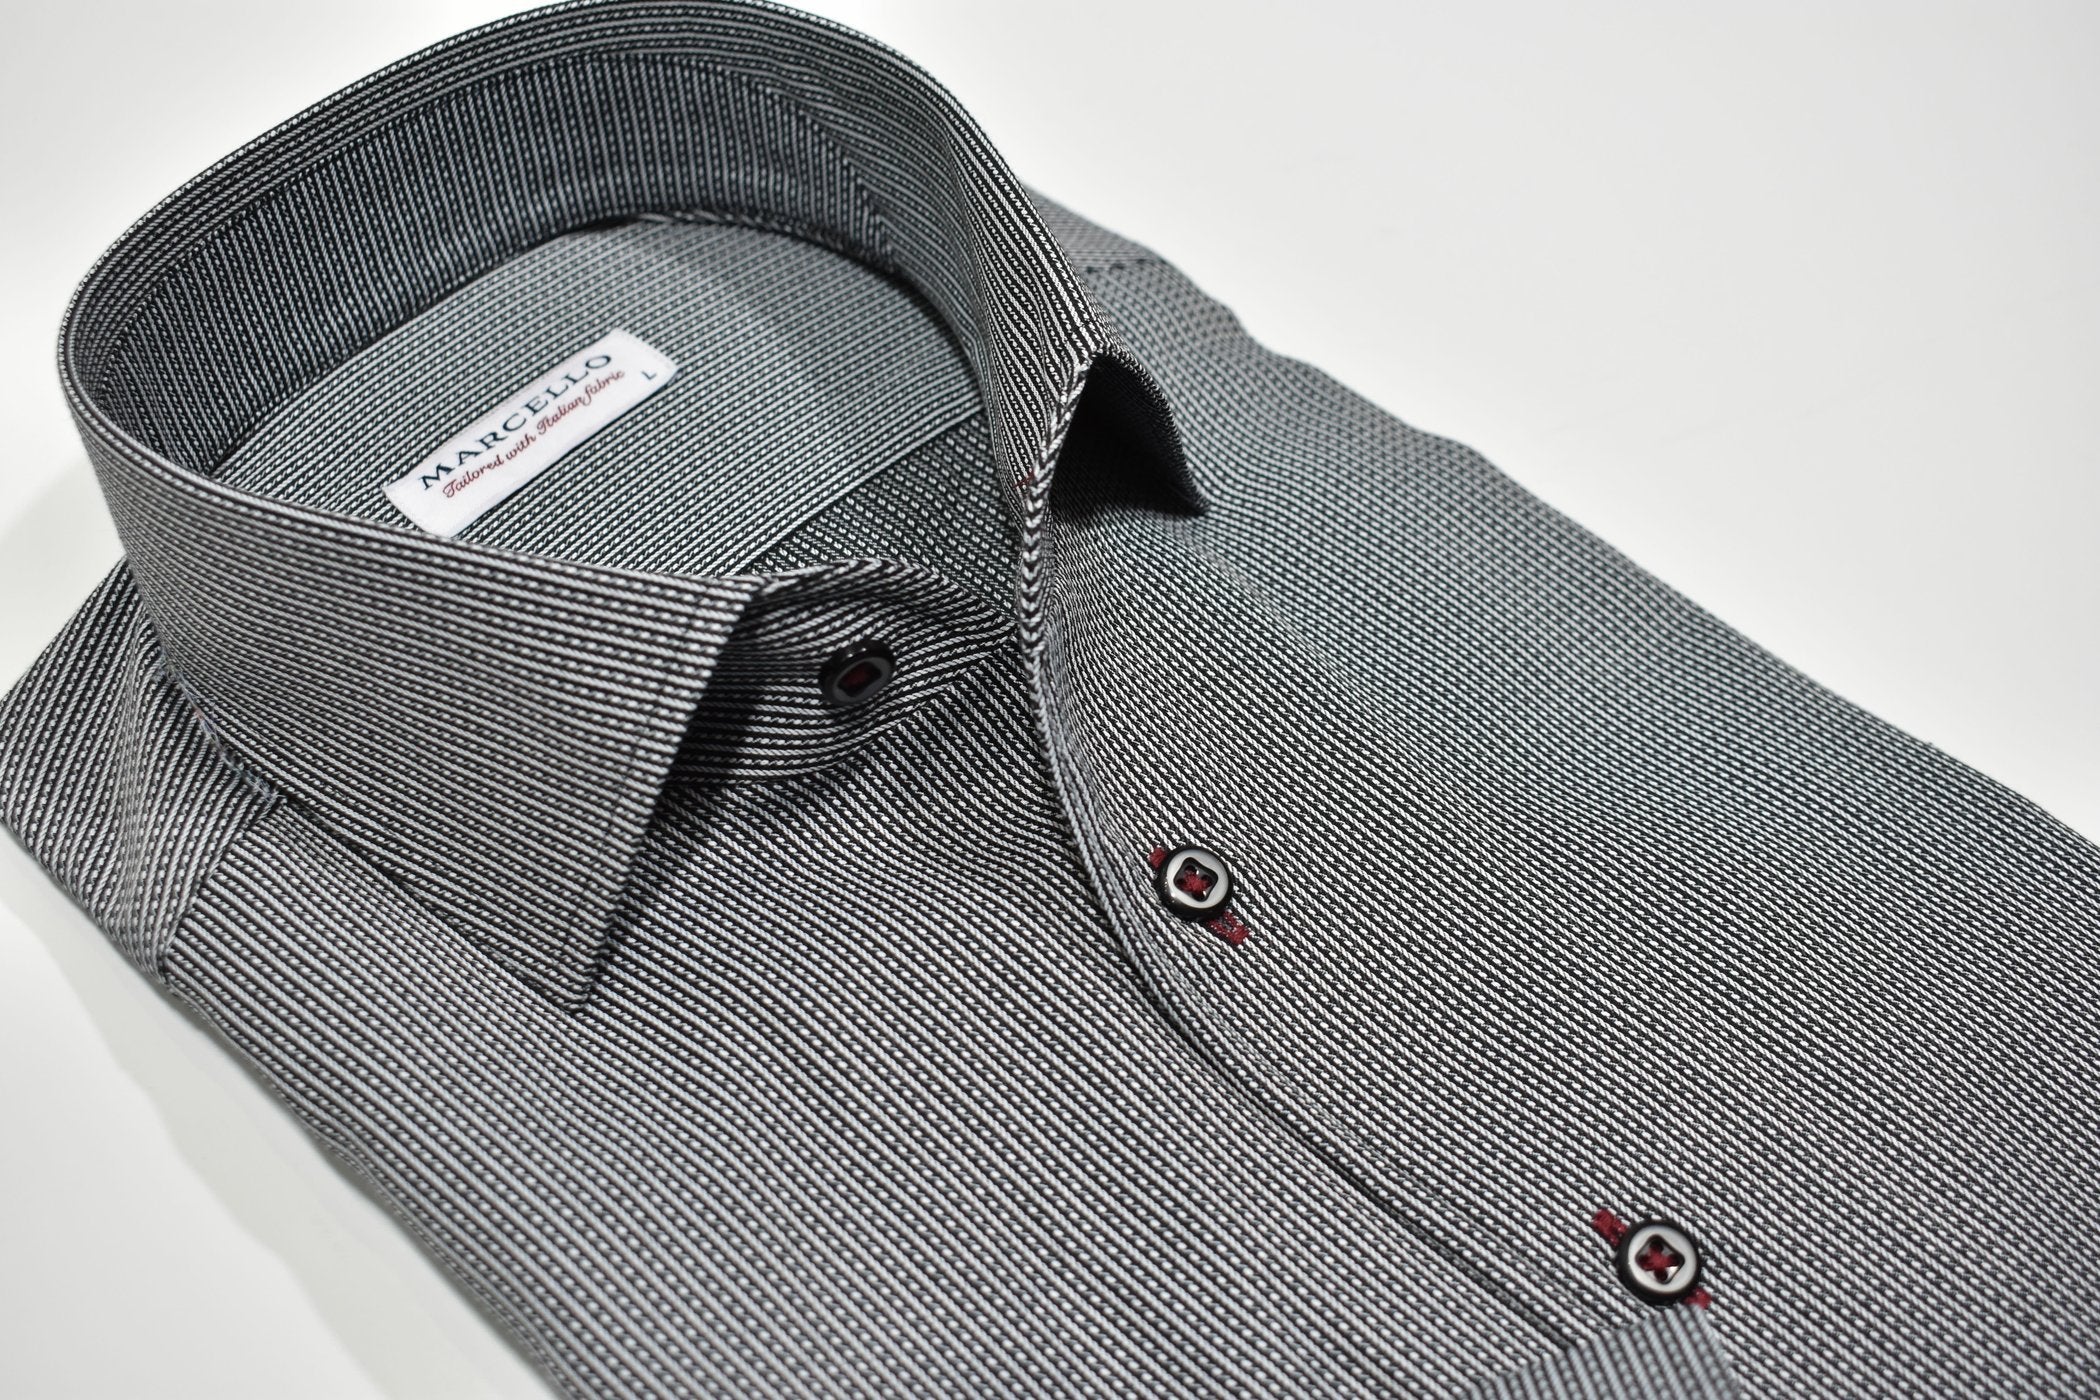 Elevate your style with the Marcello W939R Black Stripe Roll Collar. Featuring a Marcello exclusive one piece roll collar, this fine black shirt with a solid and dashed stripe is accented with custom details. Exude style and sophistication with this must-have piece.